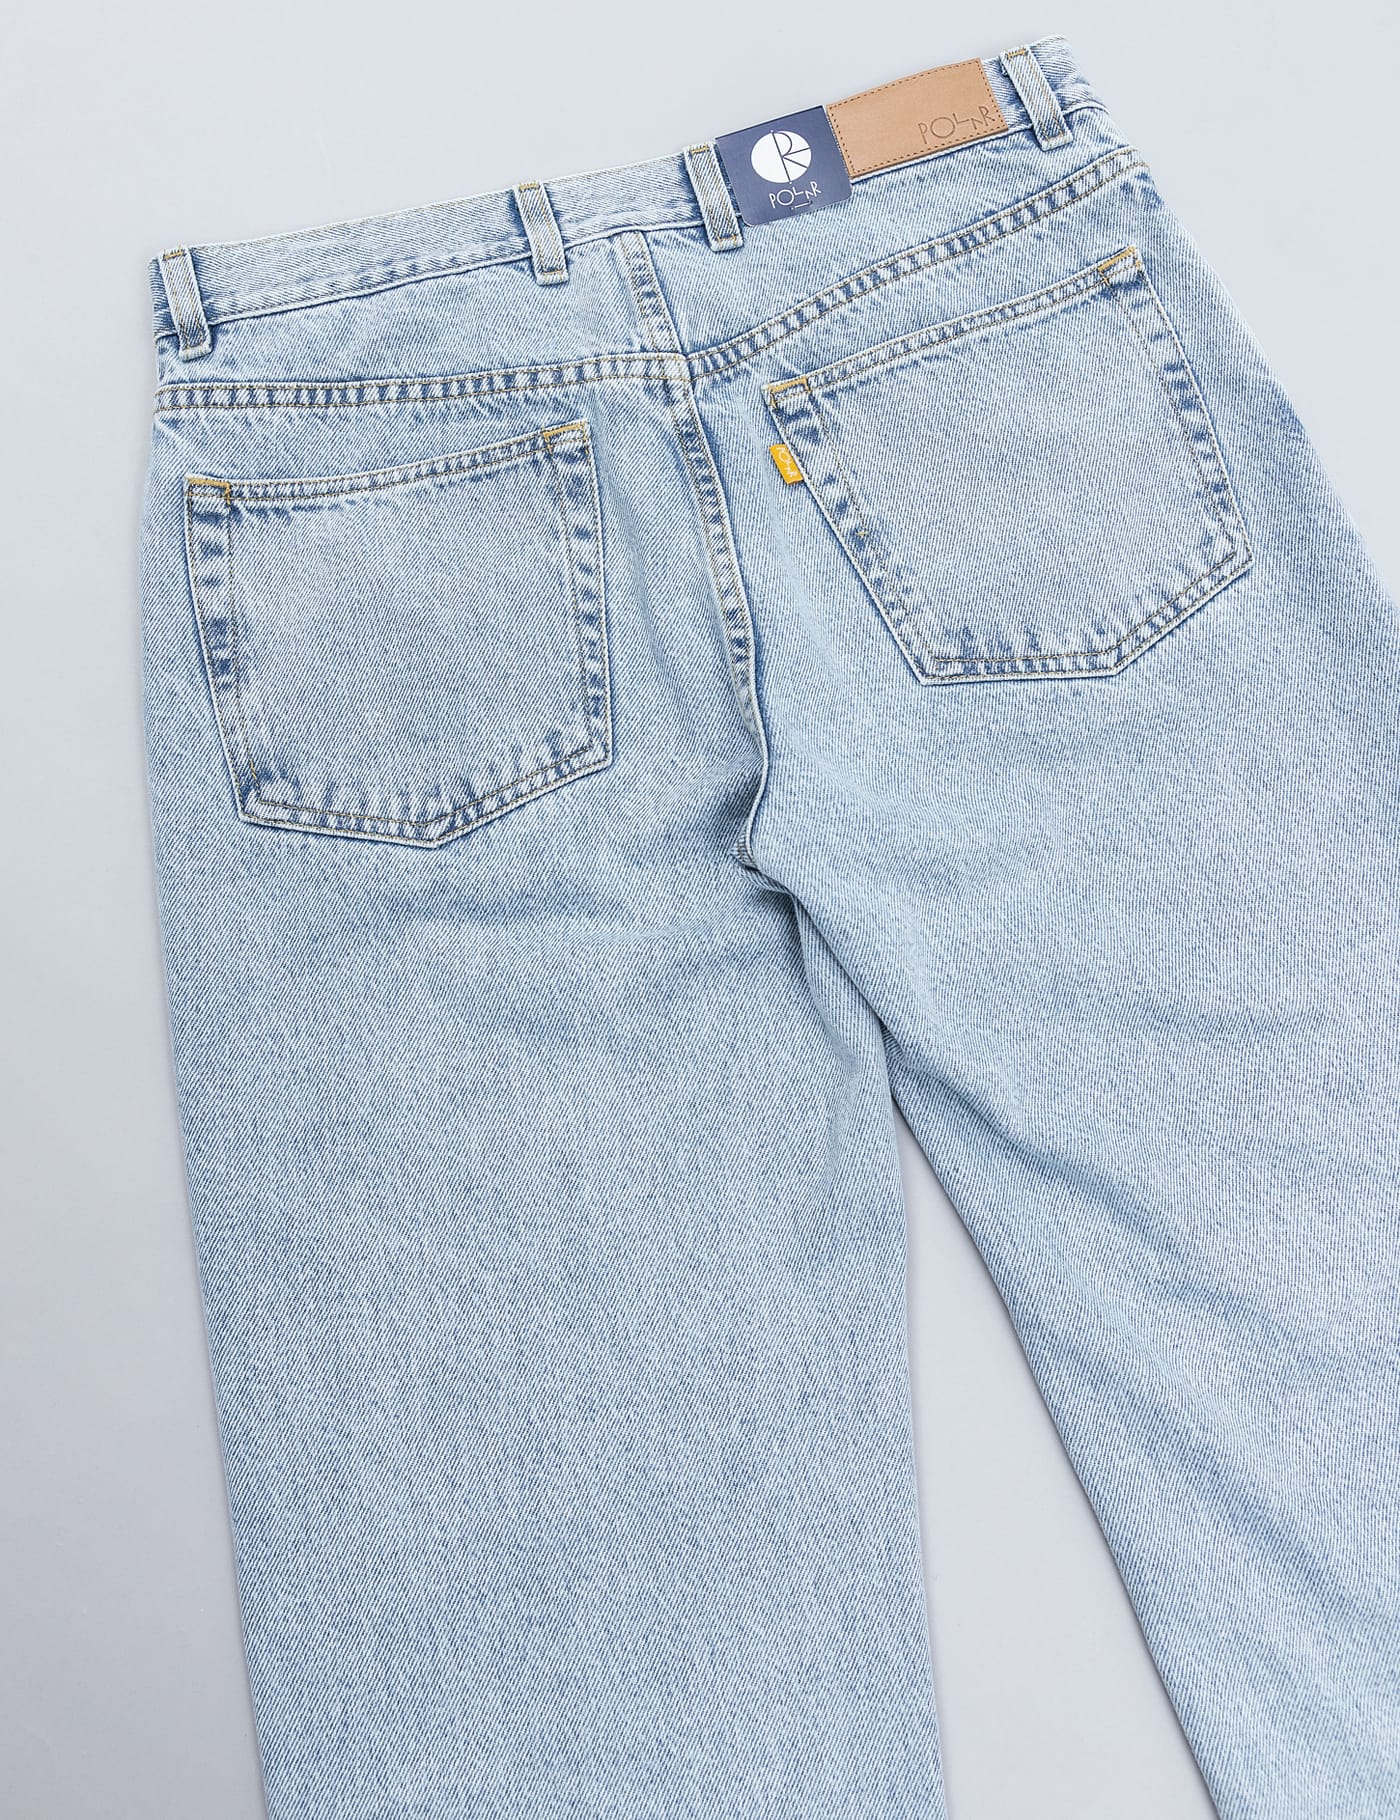 Polar Skate Co. - 90's Jeans | HBX - Globally Curated Fashion and Lifestyle  by Hypebeast